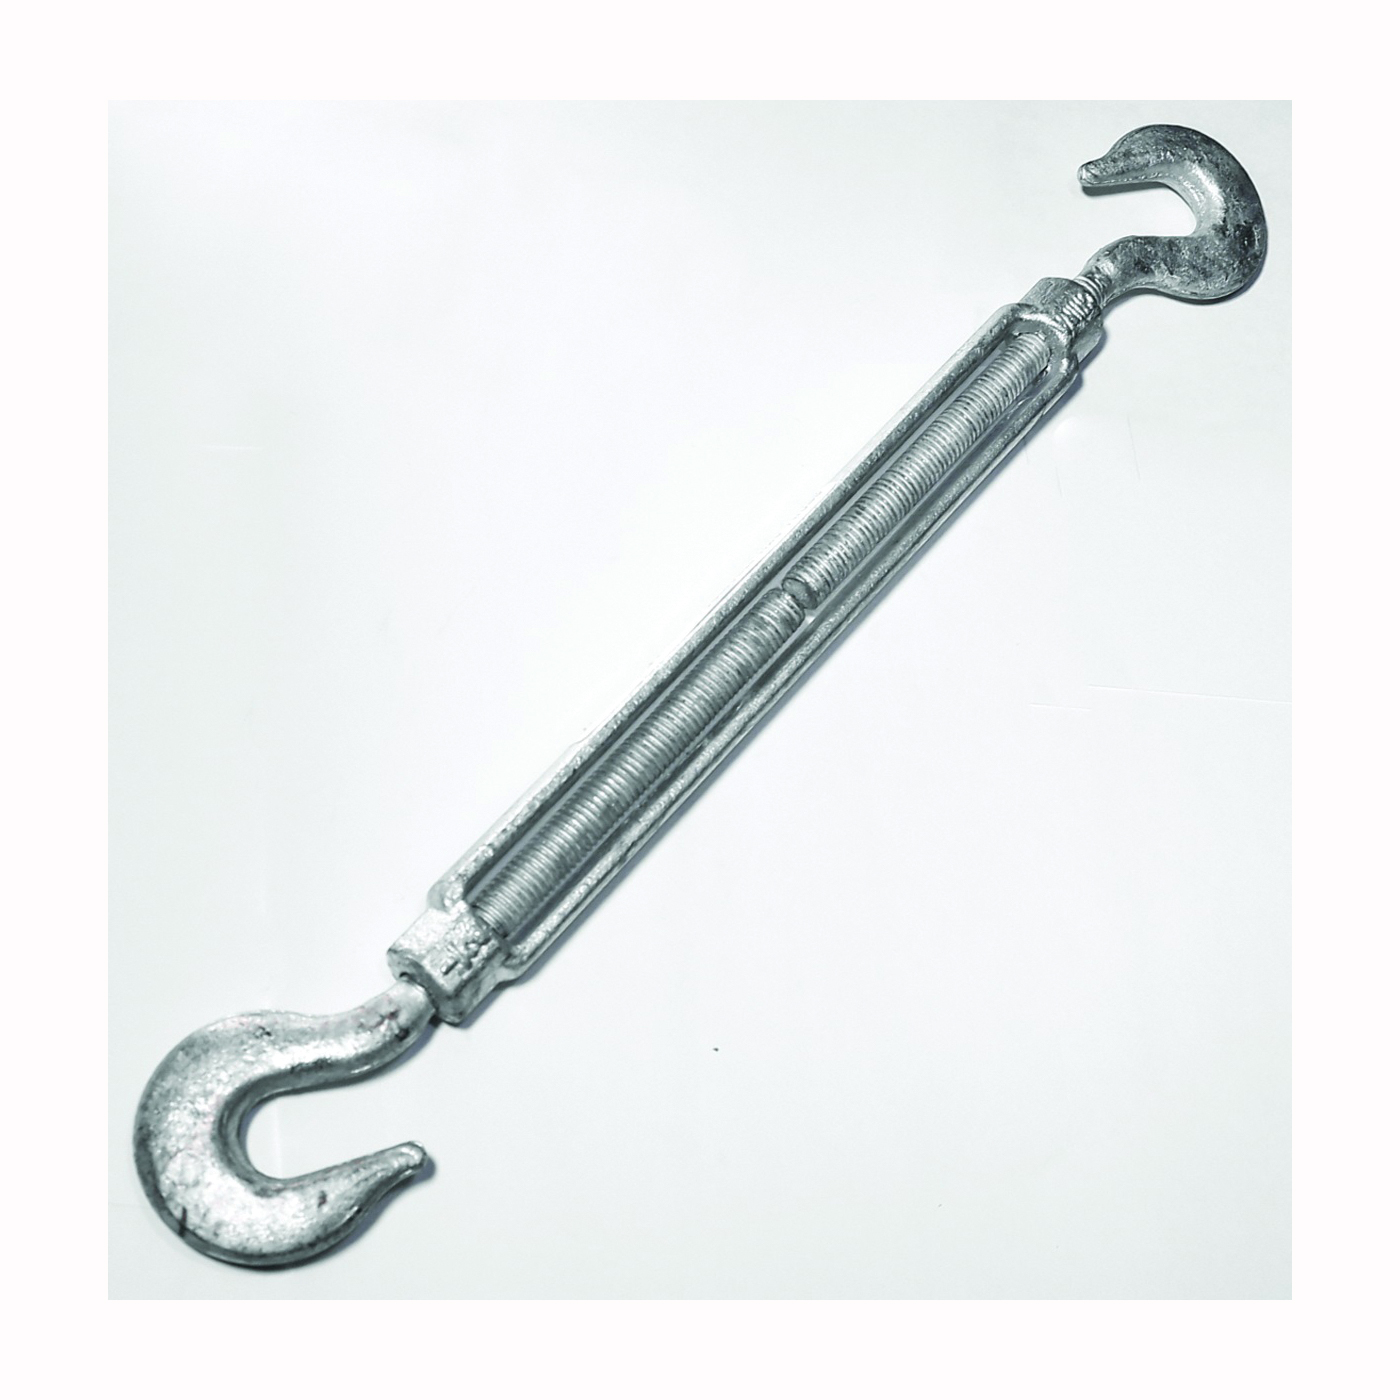 BARON 17-1/2X9 Turnbuckle, 1500 lb Working Load, 1/2 in Thread, Hook, Hook, 9 in L Take-Up, Galvanized Steel